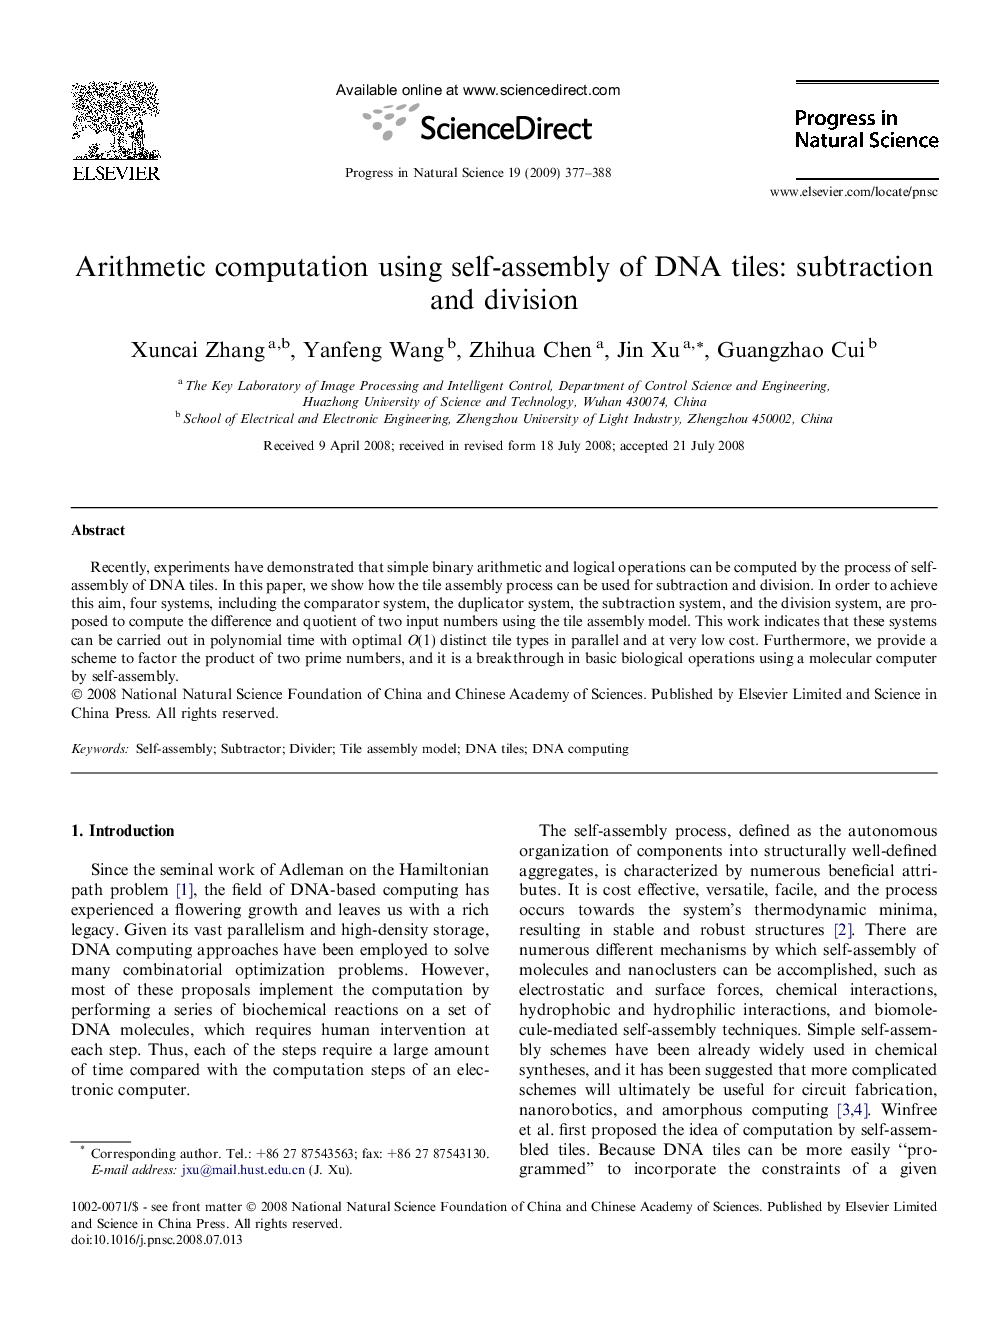 Arithmetic computation using self-assembly of DNA tiles: subtraction and division